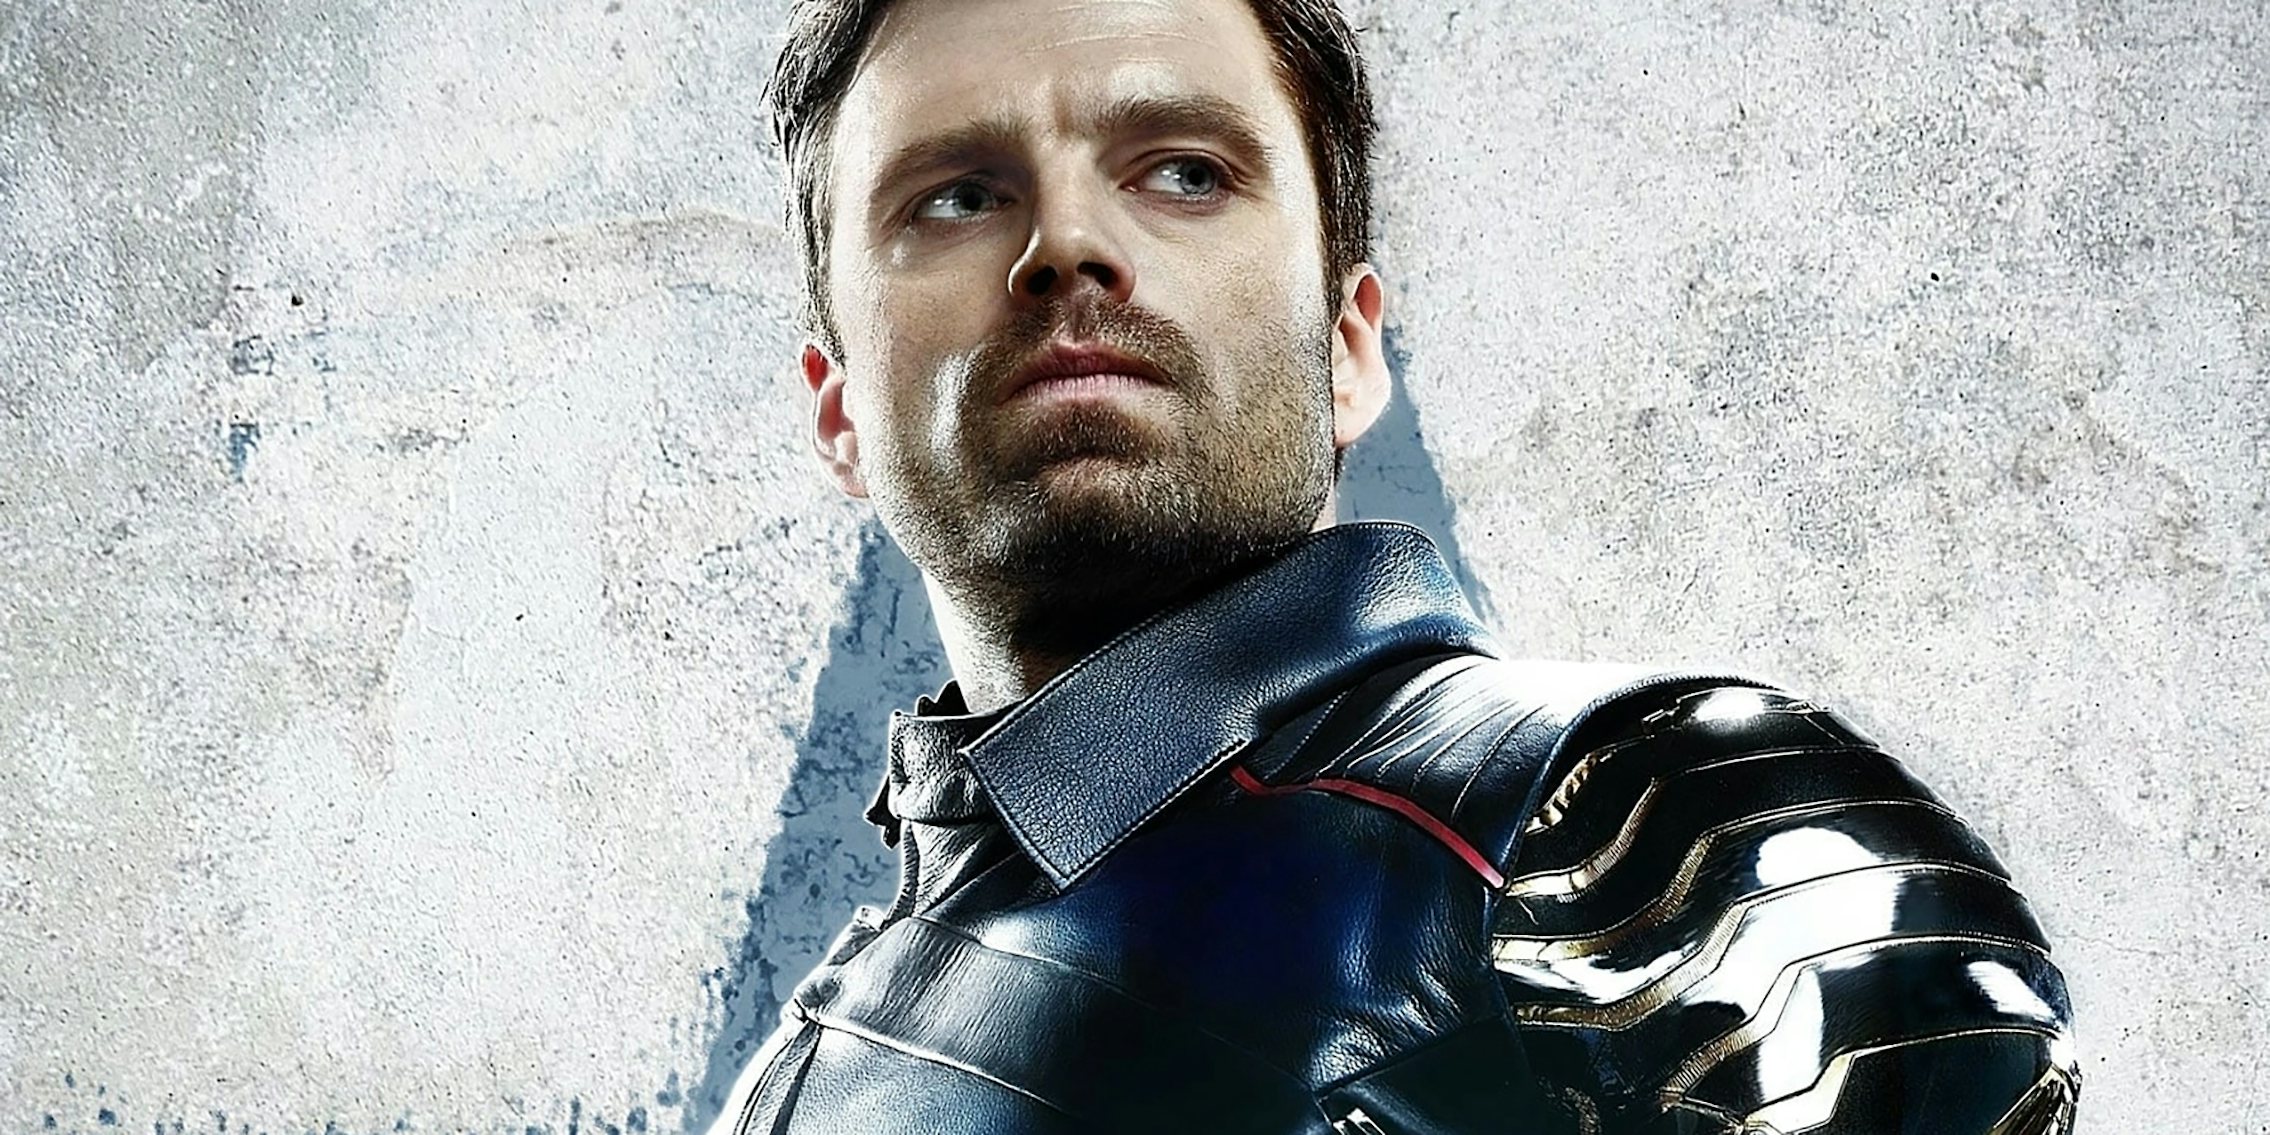 Winter Soldier looking off camera.